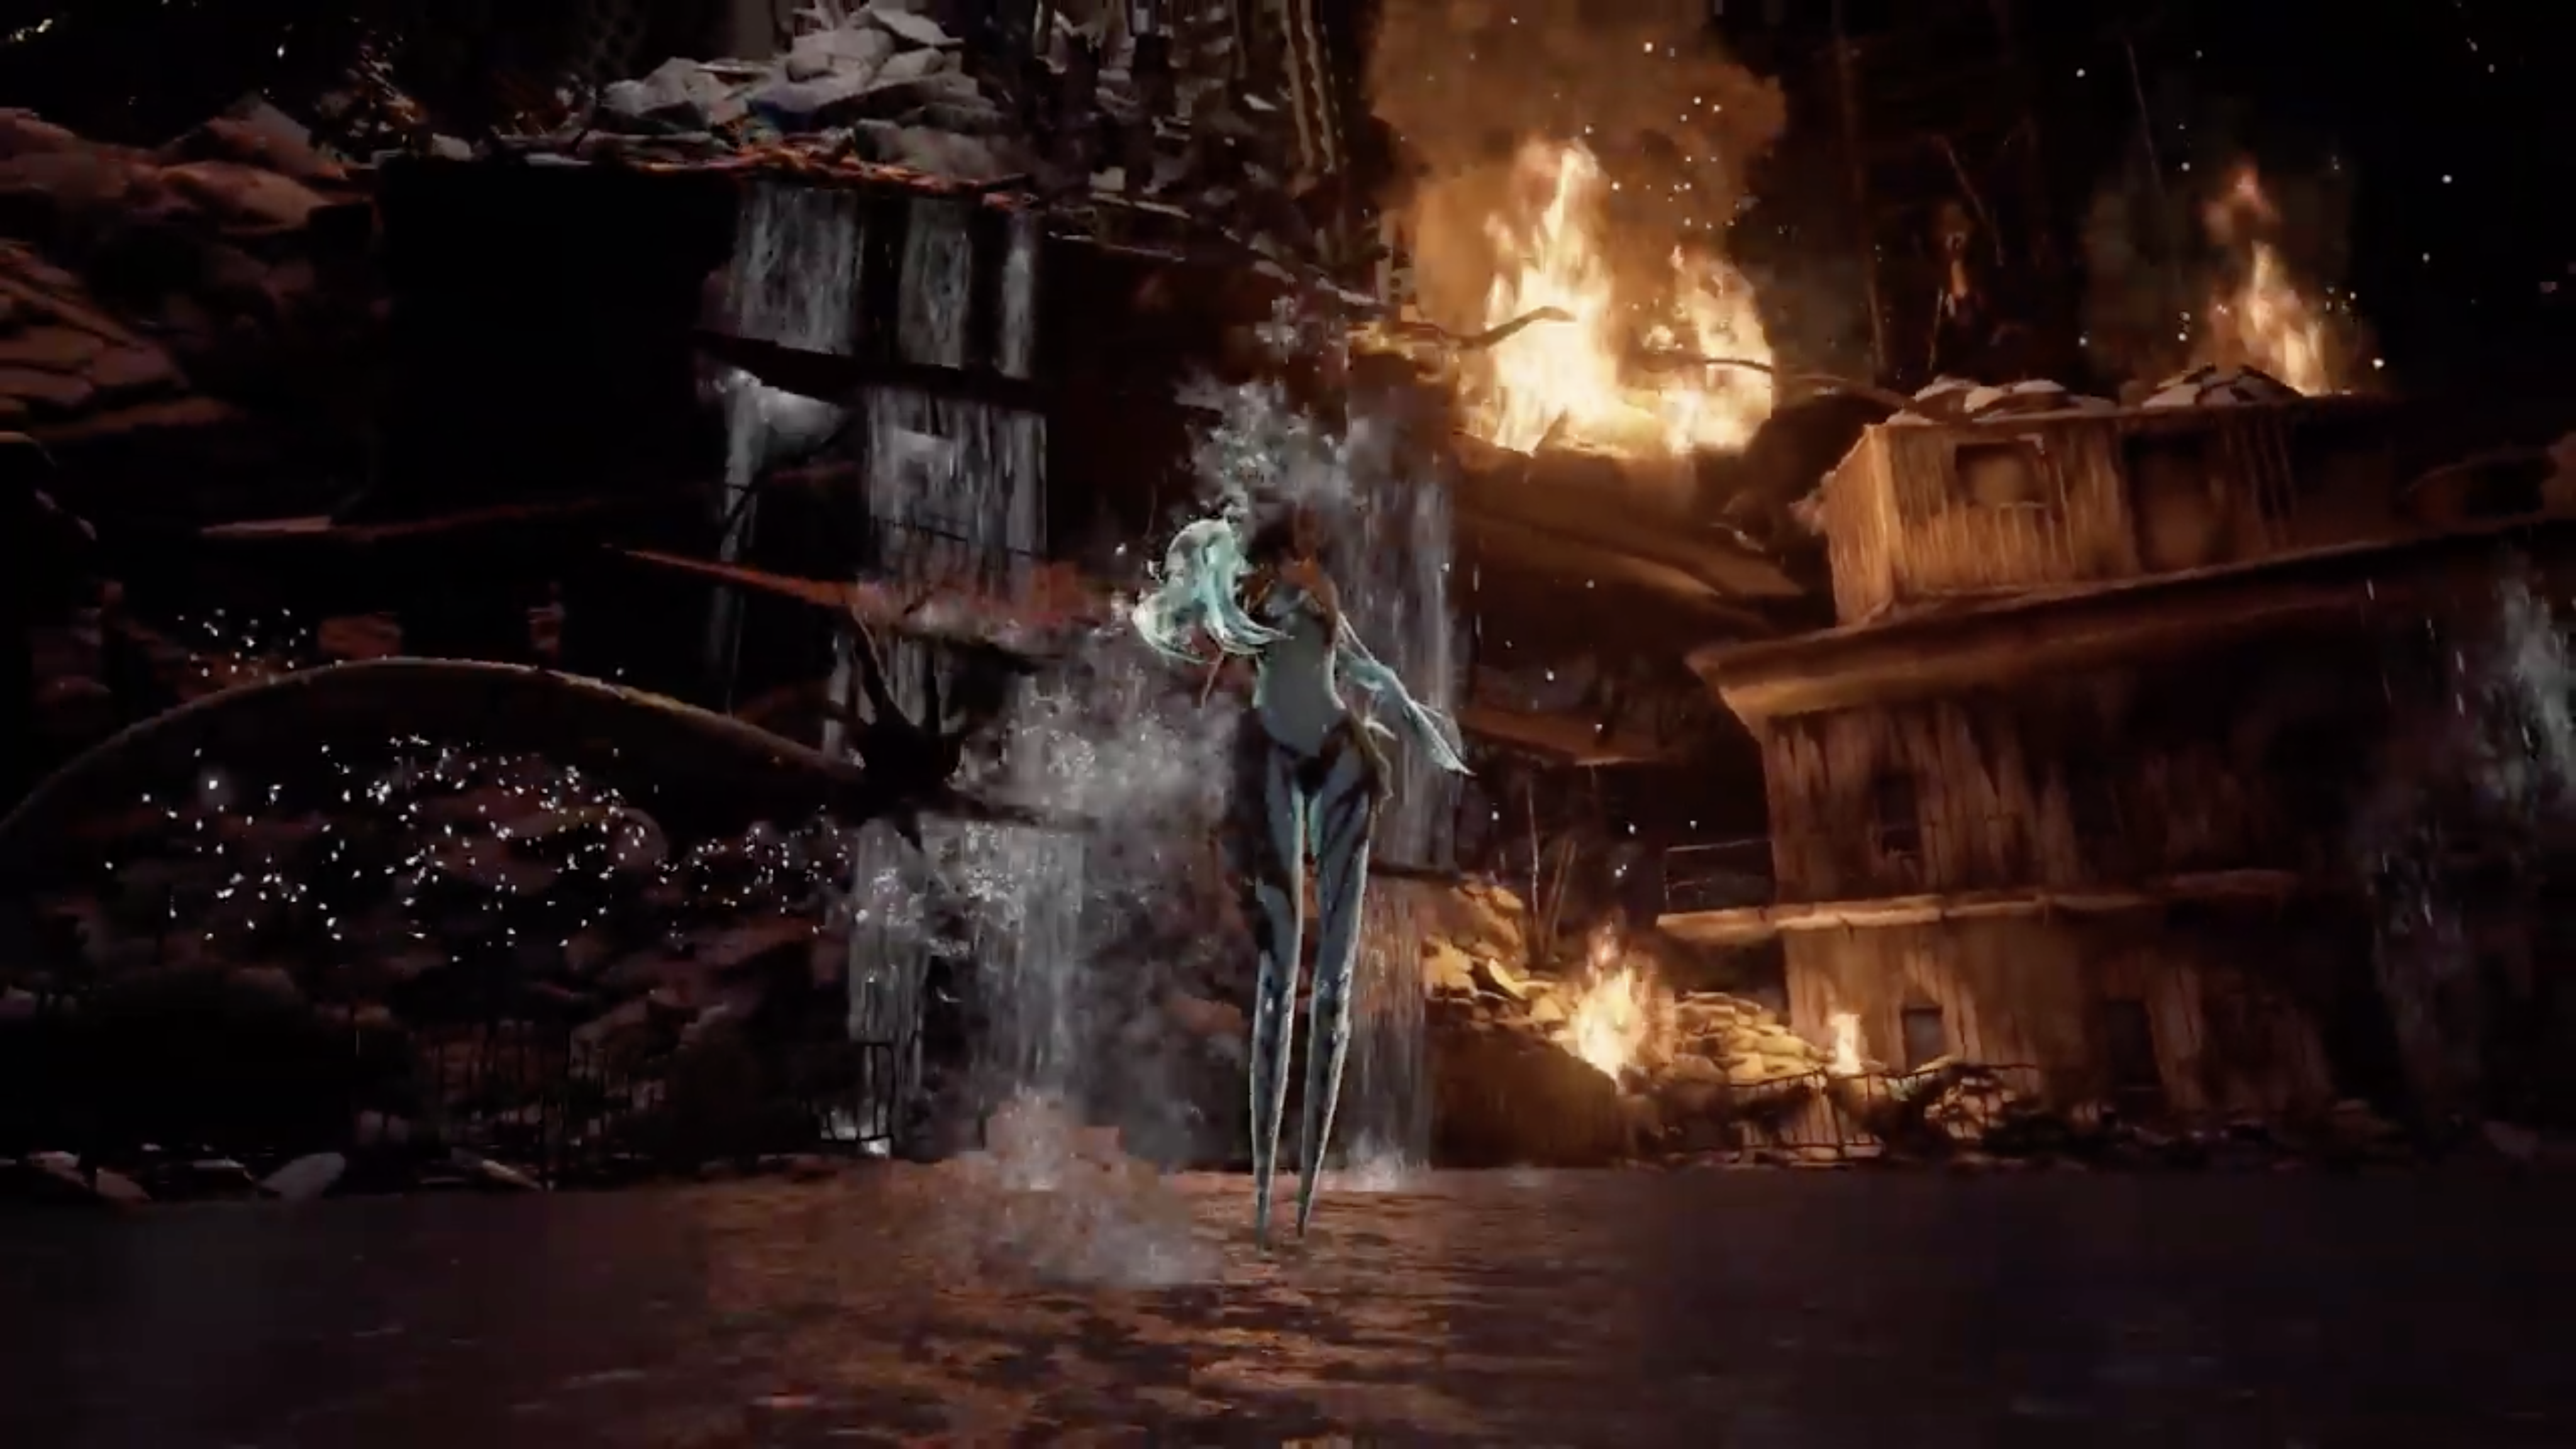 Code Vein’s Latest Trailer Shows the “Invading Executioner”